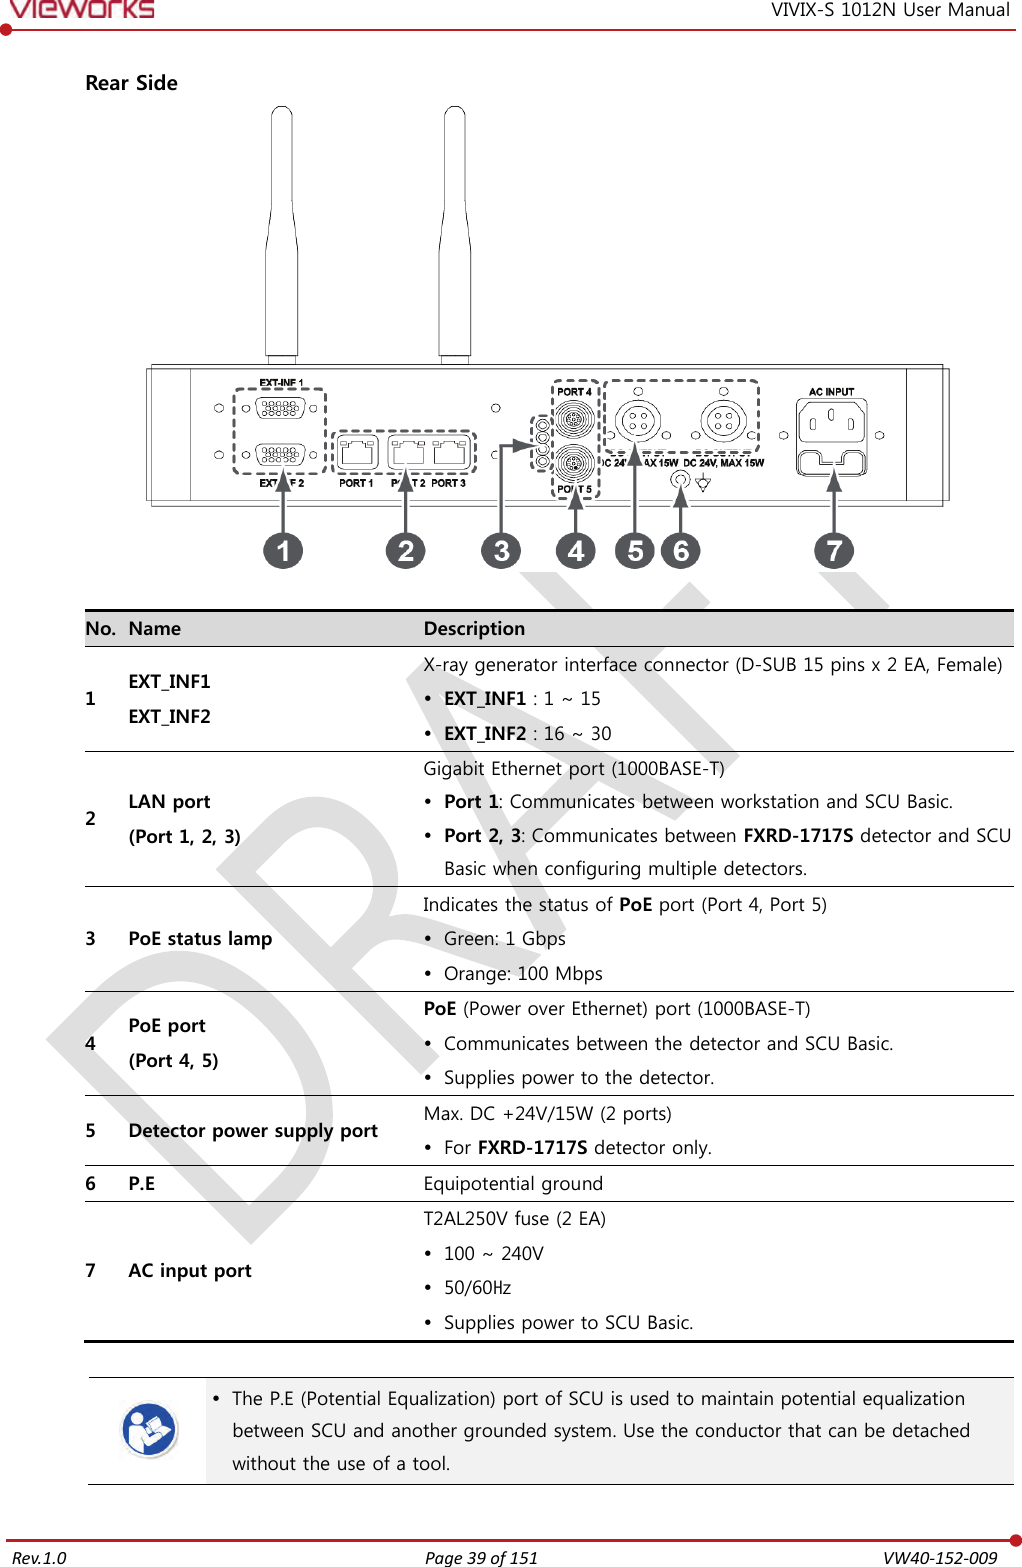   Rev.1.0 Page 39 of 151  VW40-152-009 VIVIX-S 1012N User Manual  Rear Side   No. Name Description 1 EXT_INF1 EXT_INF2 X-ray generator interface connector (D-SUB 15 pins x 2 EA, Female)  EXT_INF1 : 1 ~ 15  EXT_INF2 : 16 ~ 30 2 LAN port (Port 1, 2, 3) Gigabit Ethernet port (1000BASE-T)  Port 1: Communicates between workstation and SCU Basic.  Port 2, 3: Communicates between FXRD-1717S detector and SCU Basic when configuring multiple detectors. 3 PoE status lamp Indicates the status of PoE port (Port 4, Port 5)  Green: 1 Gbps  Orange: 100 Mbps 4 PoE port (Port 4, 5) PoE (Power over Ethernet) port (1000BASE-T)  Communicates between the detector and SCU Basic.  Supplies power to the detector. 5 Detector power supply port Max. DC +24V/15W (2 ports)  For FXRD-1717S detector only. 6 P.E Equipotential ground 7 AC input port T2AL250V fuse (2 EA)  100 ~ 240V  50/60㎐  Supplies power to SCU Basic.    The P.E (Potential Equalization) port of SCU is used to maintain potential equalization between SCU and another grounded system. Use the conductor that can be detached without the use of a tool.  